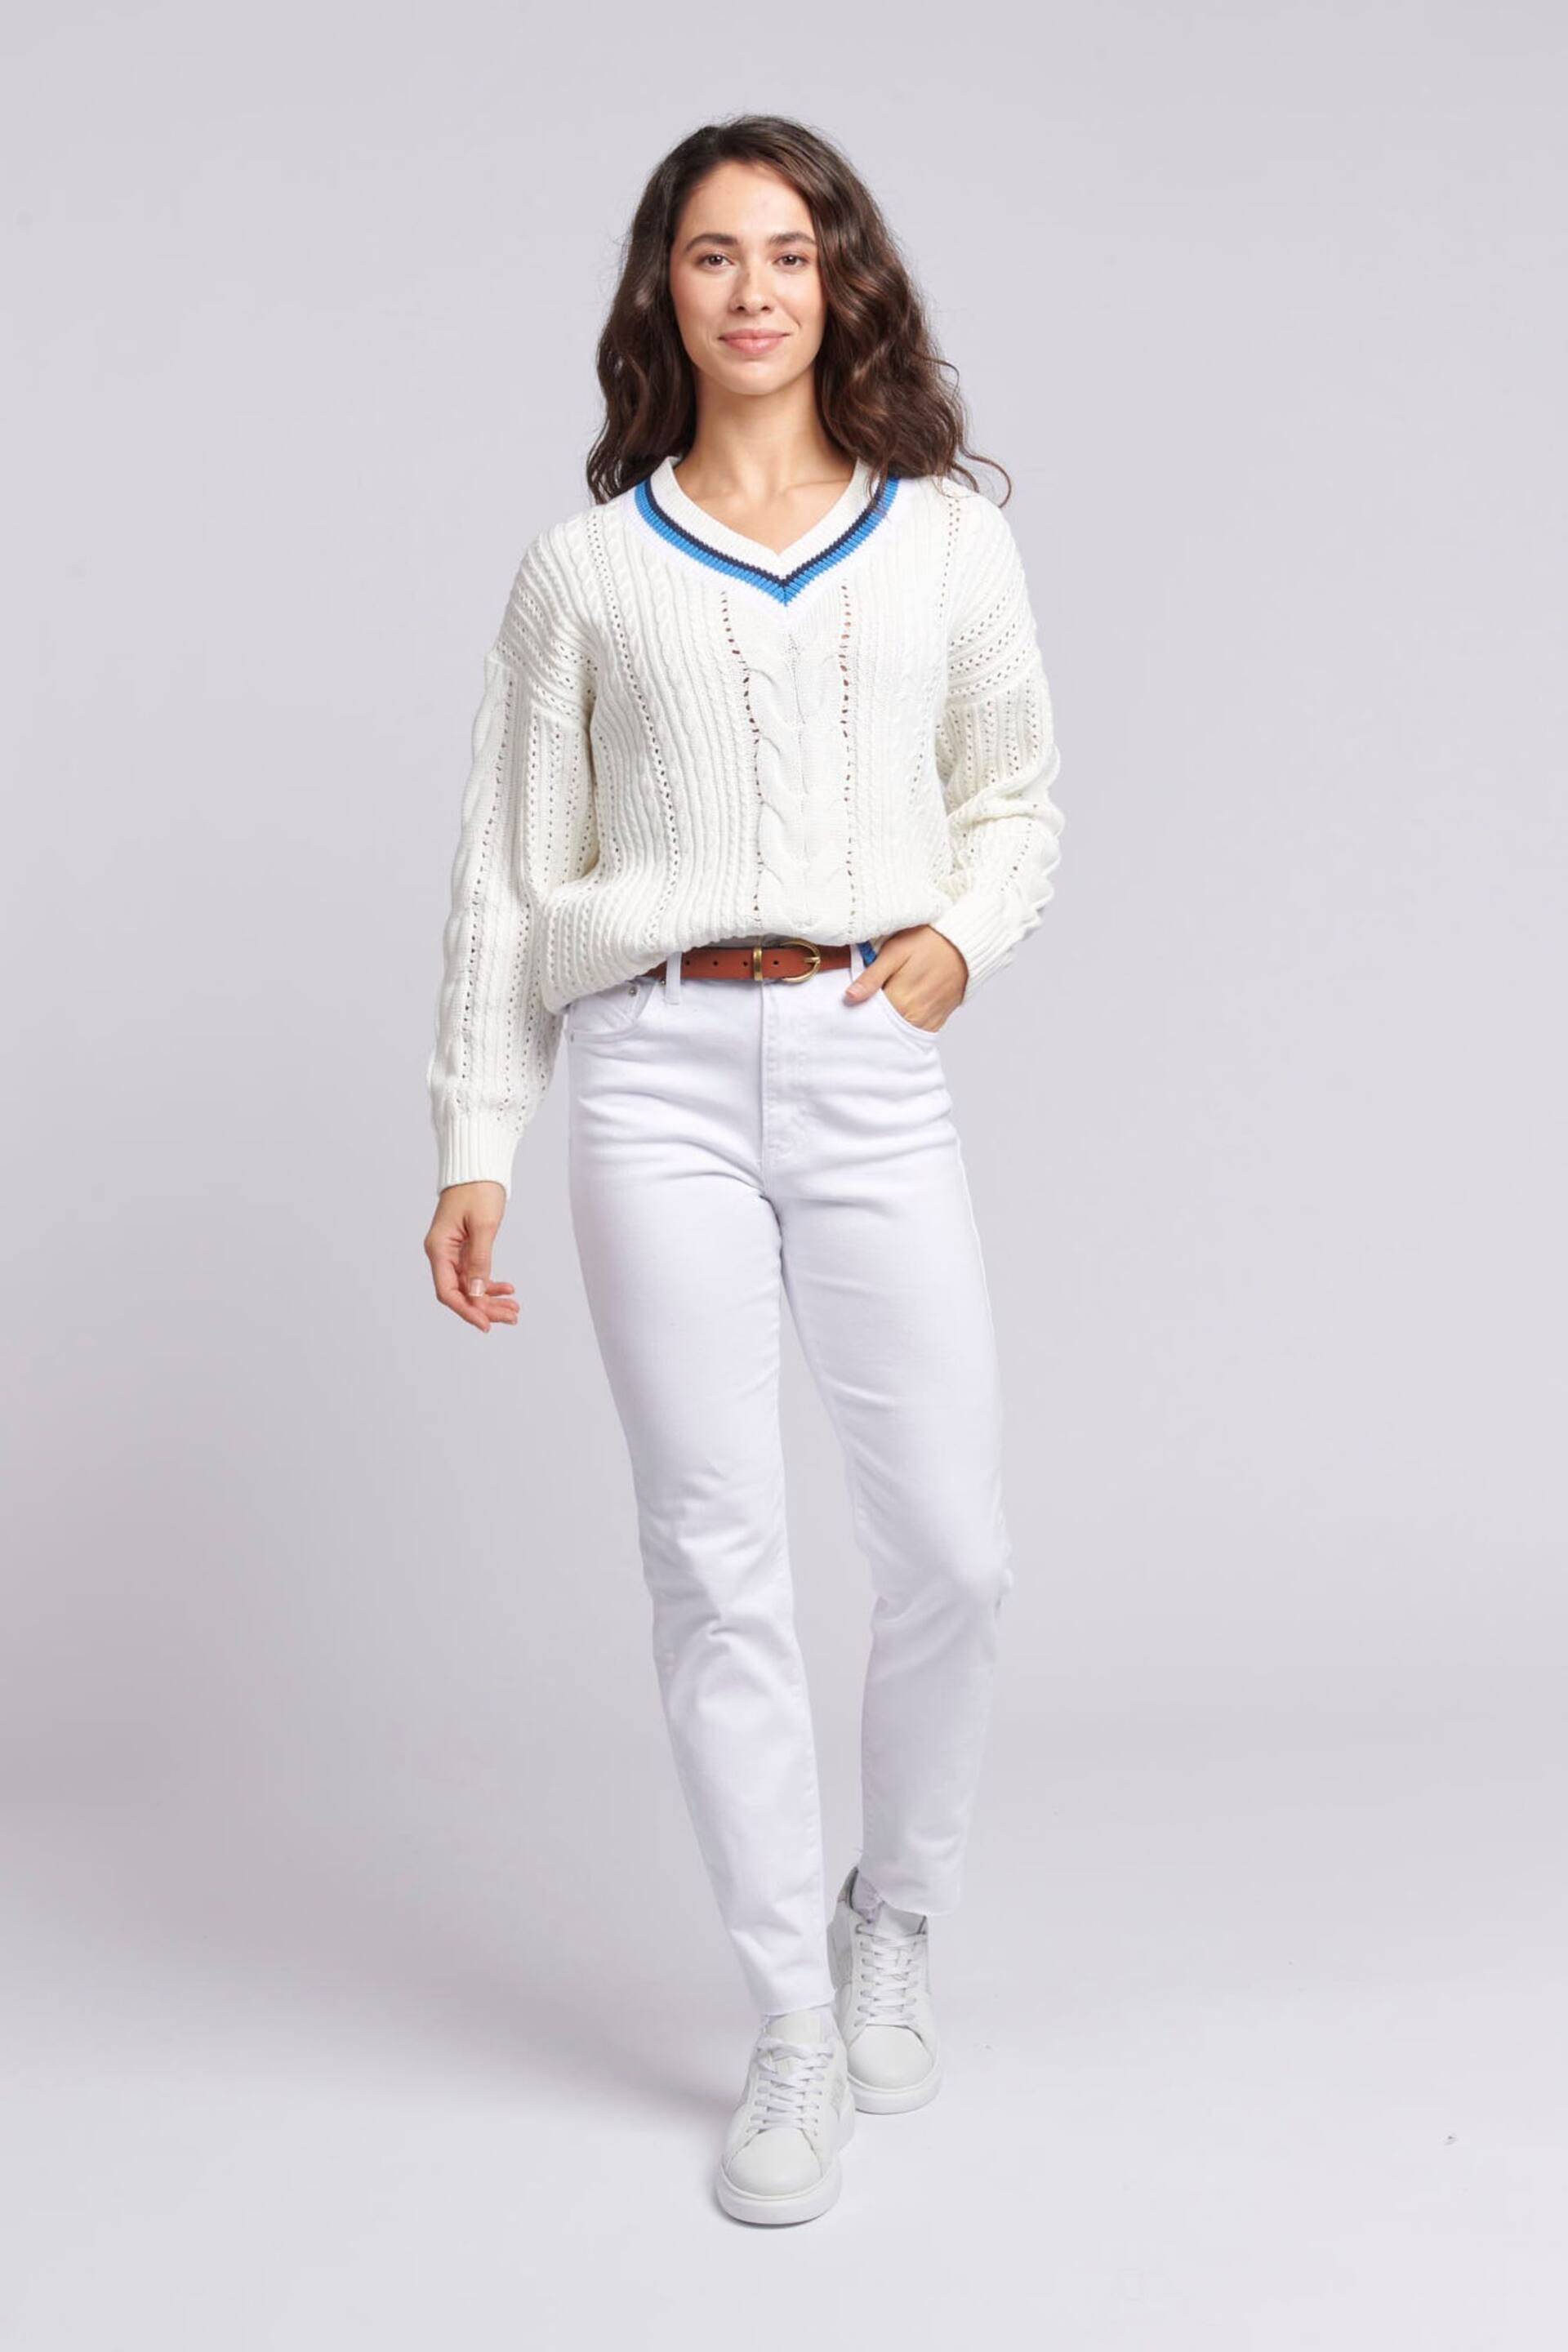 U.S. Polo Assn. Womens Cricket White Jumper - Image 3 of 8